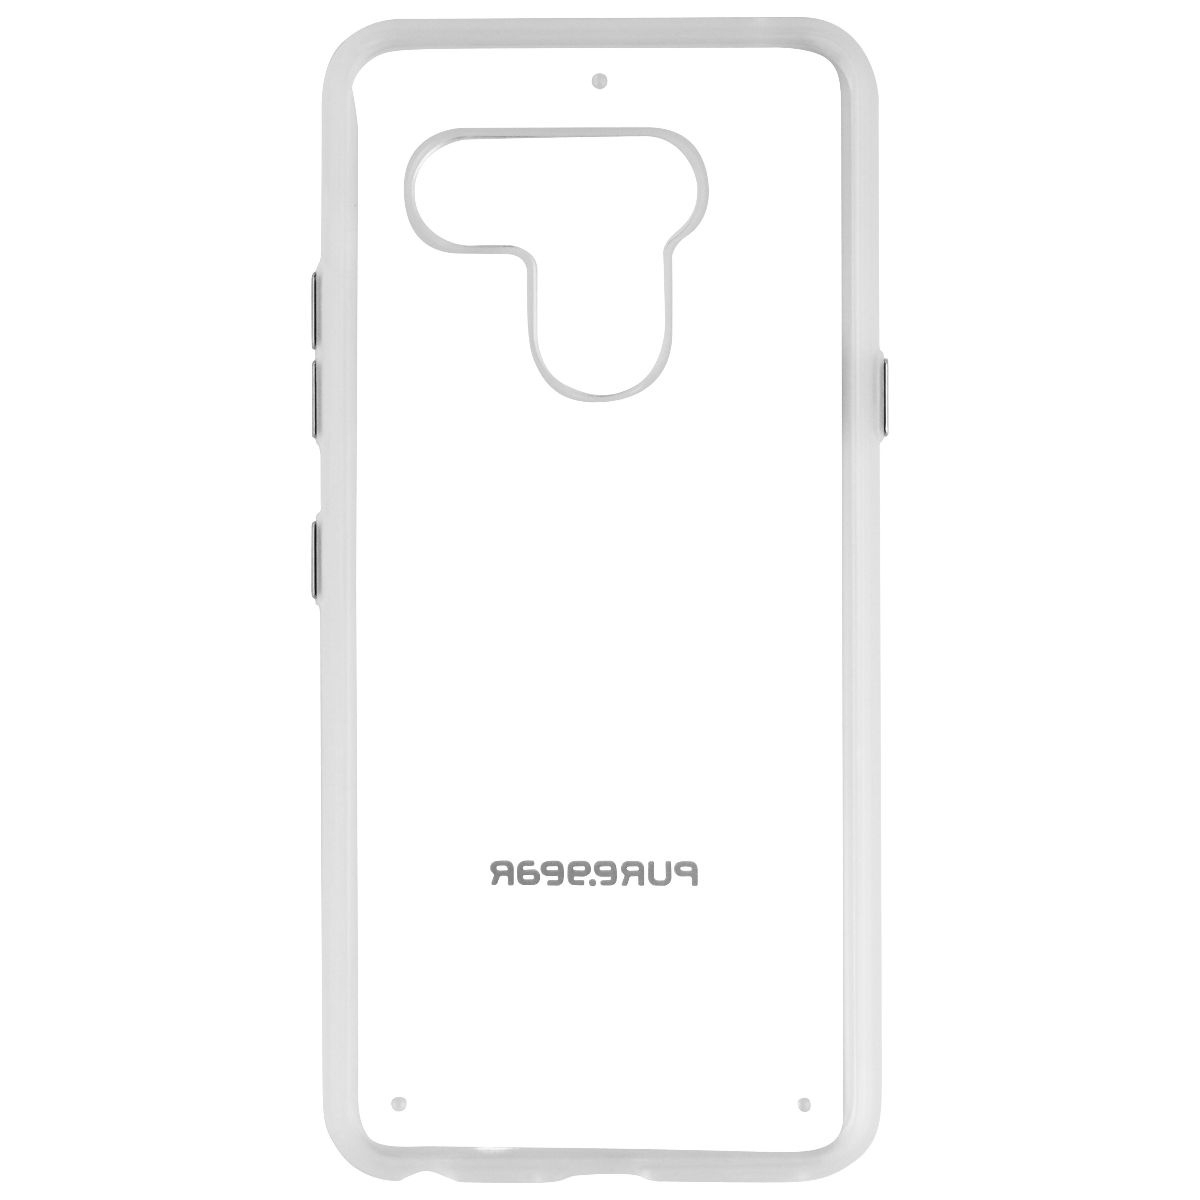 PureGear Slim Shell Series Case For LG G8 ThinQ Smartphones - Clear